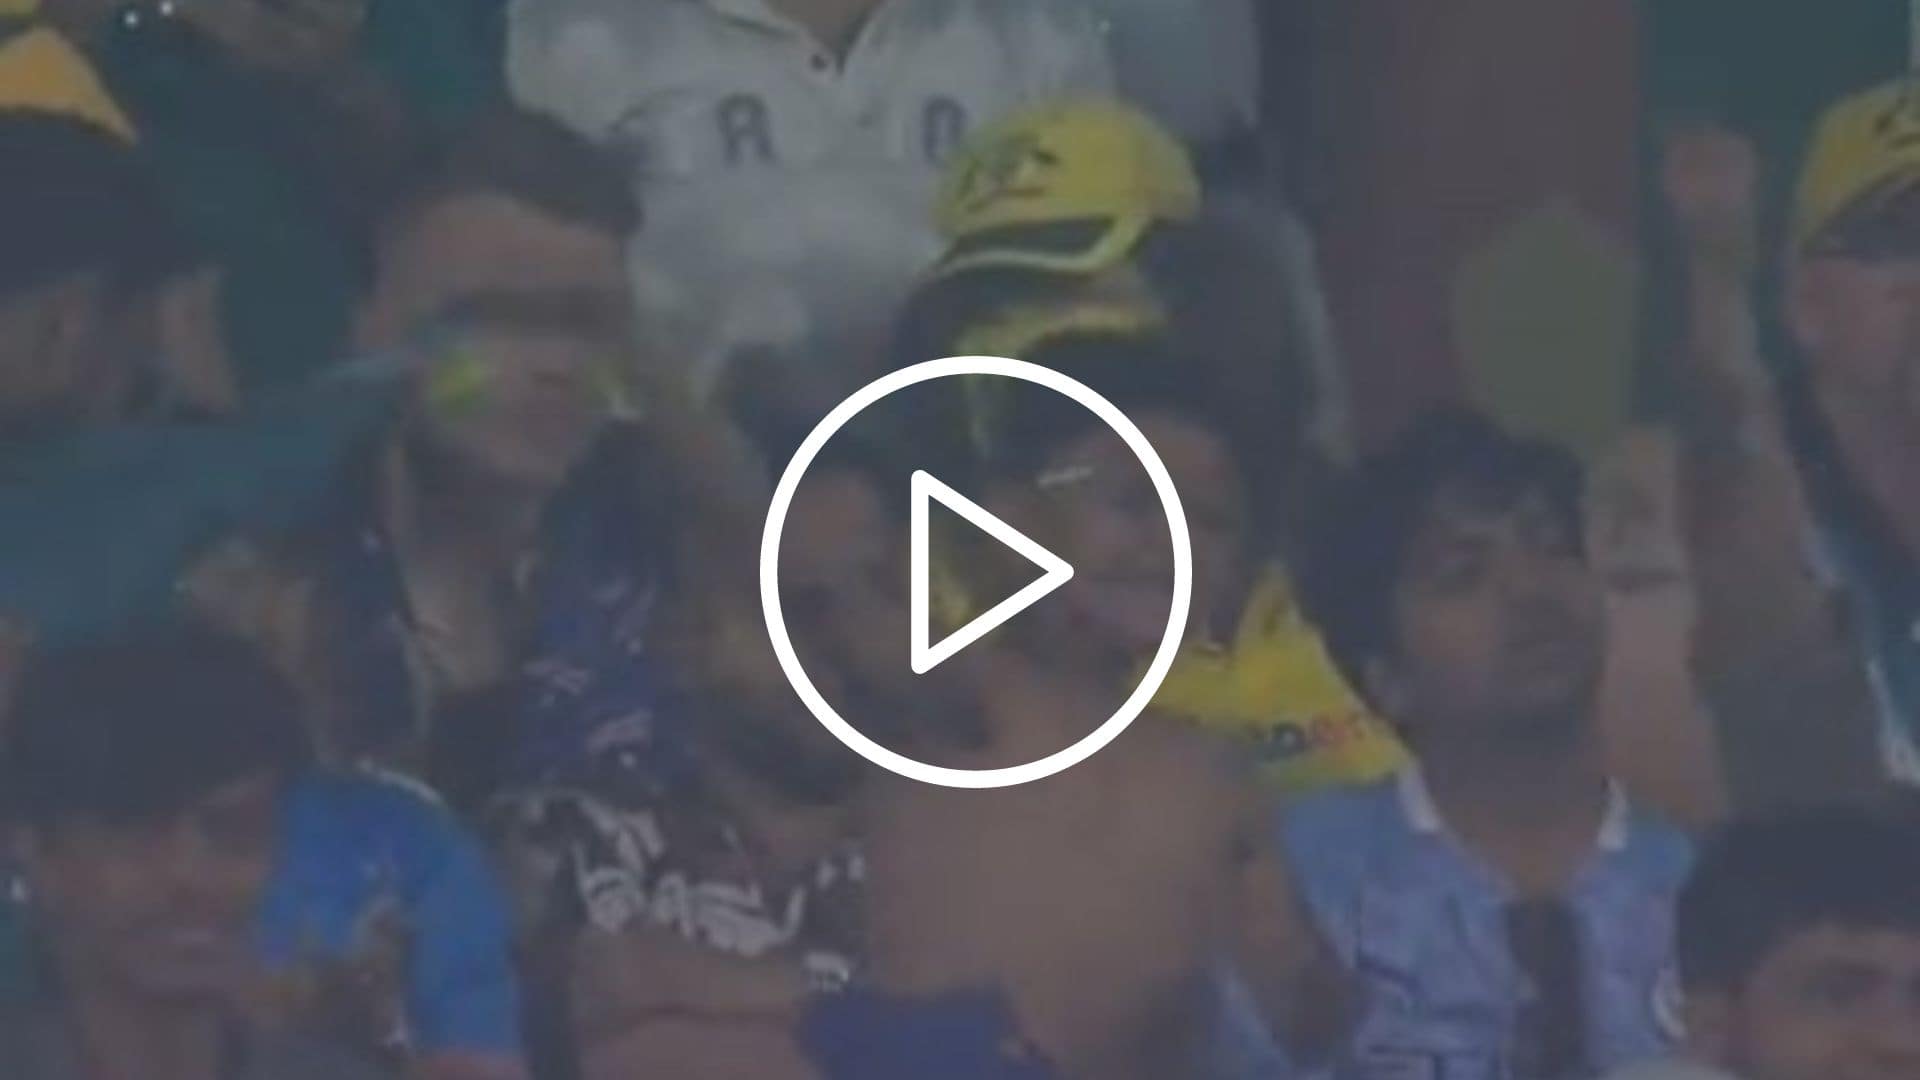 [Watch] Fan In Eden Gardens Recreates Iconic Shirtless Ganguly Celebration In SA-AUS Semifinal